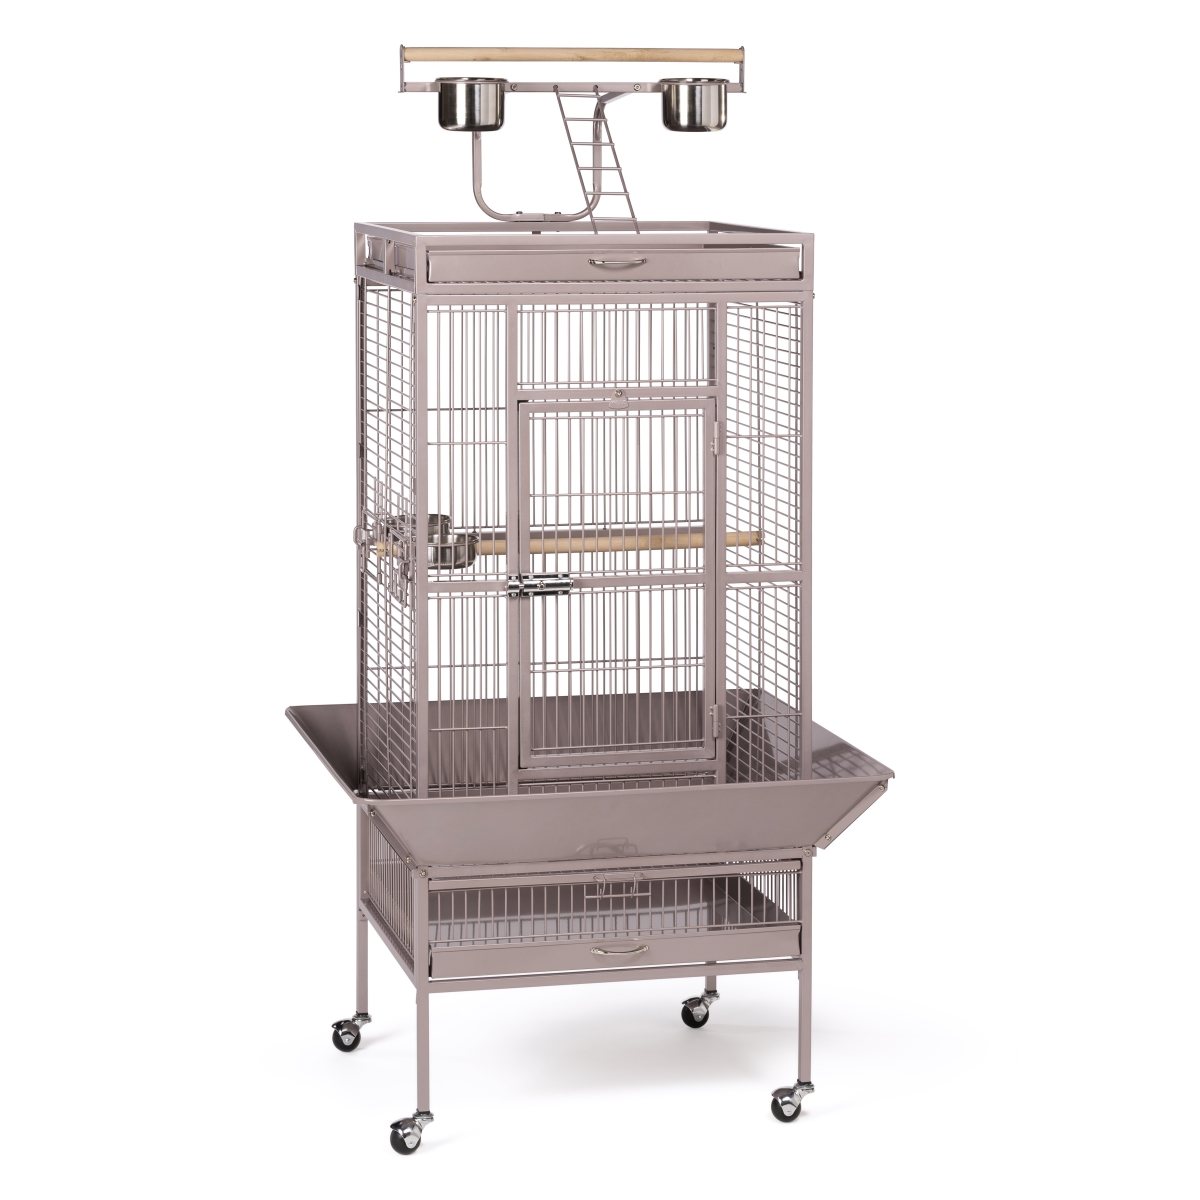 Picture of Prevue Pet Products 3152BLUSH Playtop Bird Home in Blush Finish